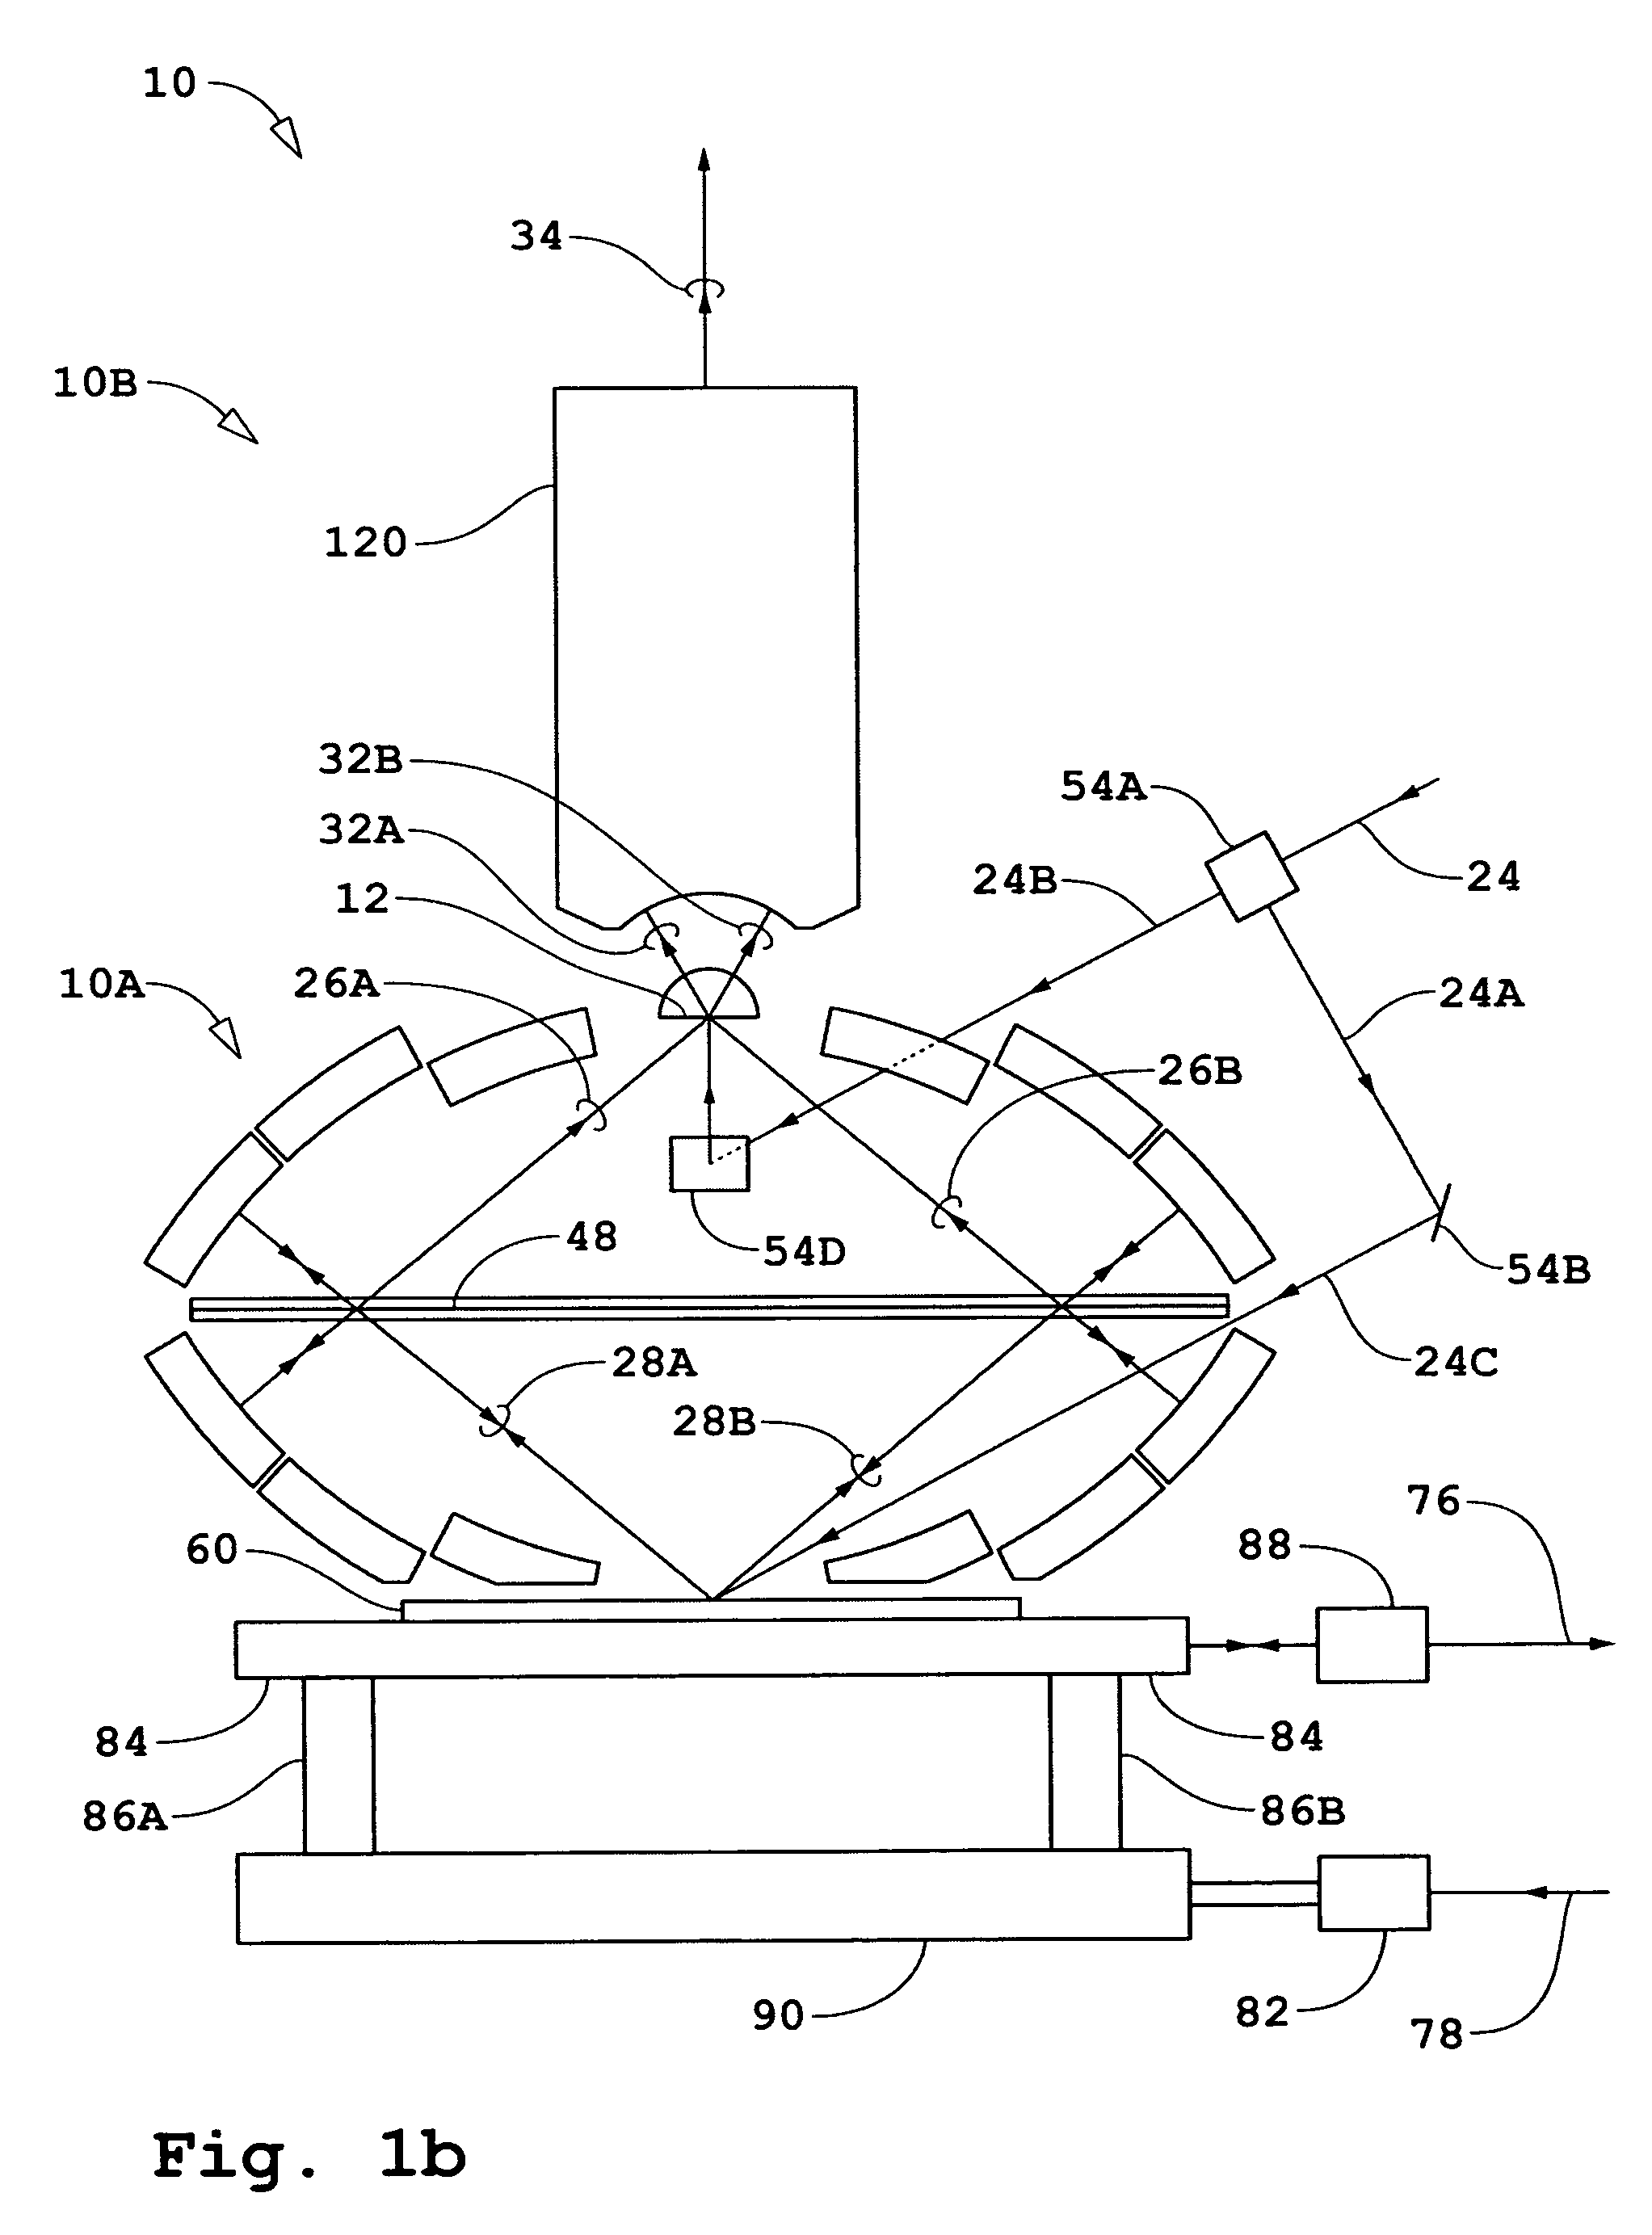 Catoptric imaging systems comprising pellicle and/or aperture-array beam-splitters and non-adaptive and/or adaptive catoptric surfaces